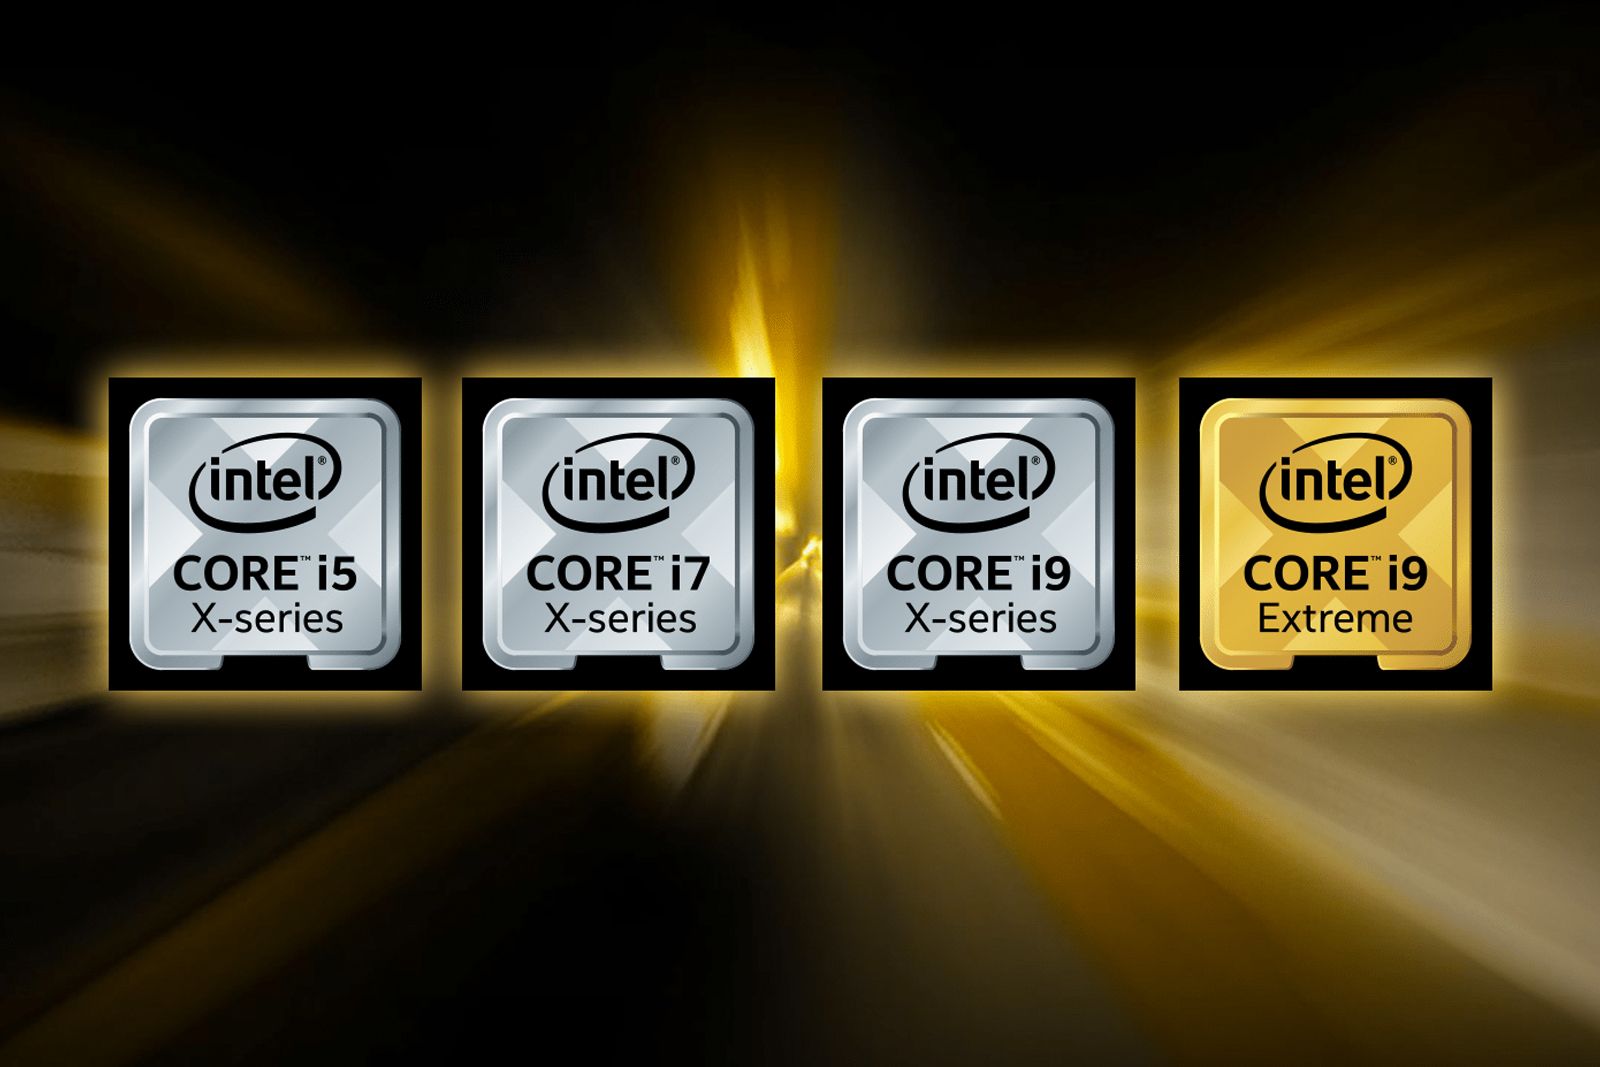 Intel debuts competitively priced Core i9 X Series for extreme performance image 1